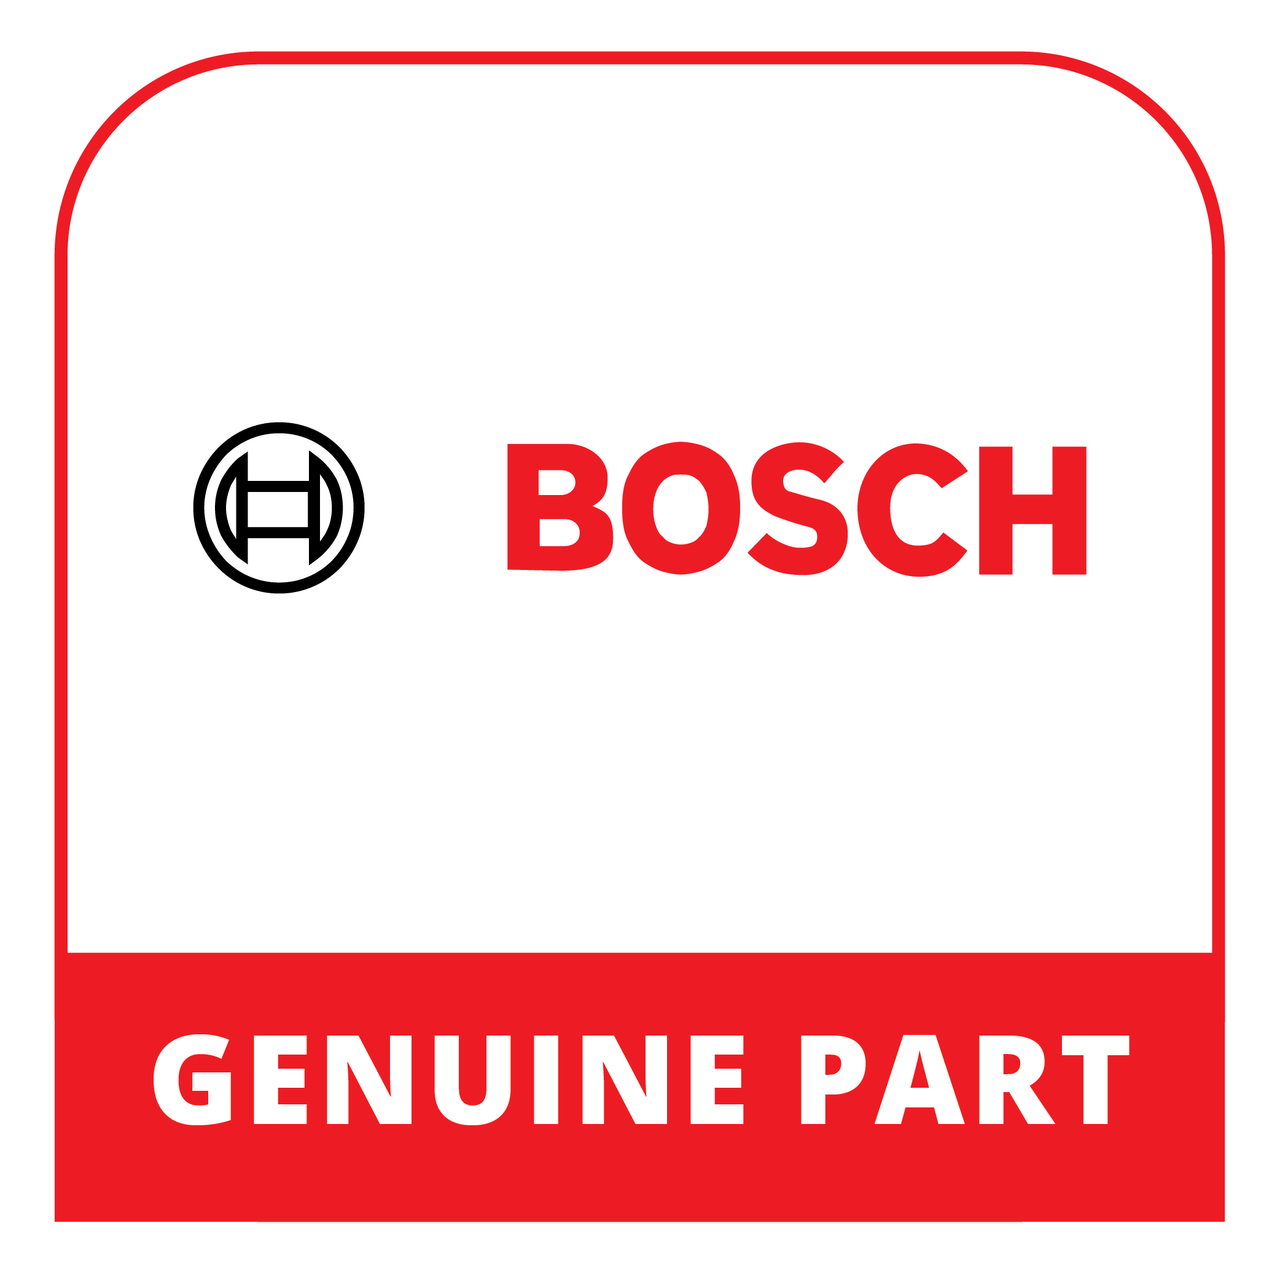 Bosch (Thermador) 11010062 - Bottle Tray - Genuine Bosch (Thermador) Part